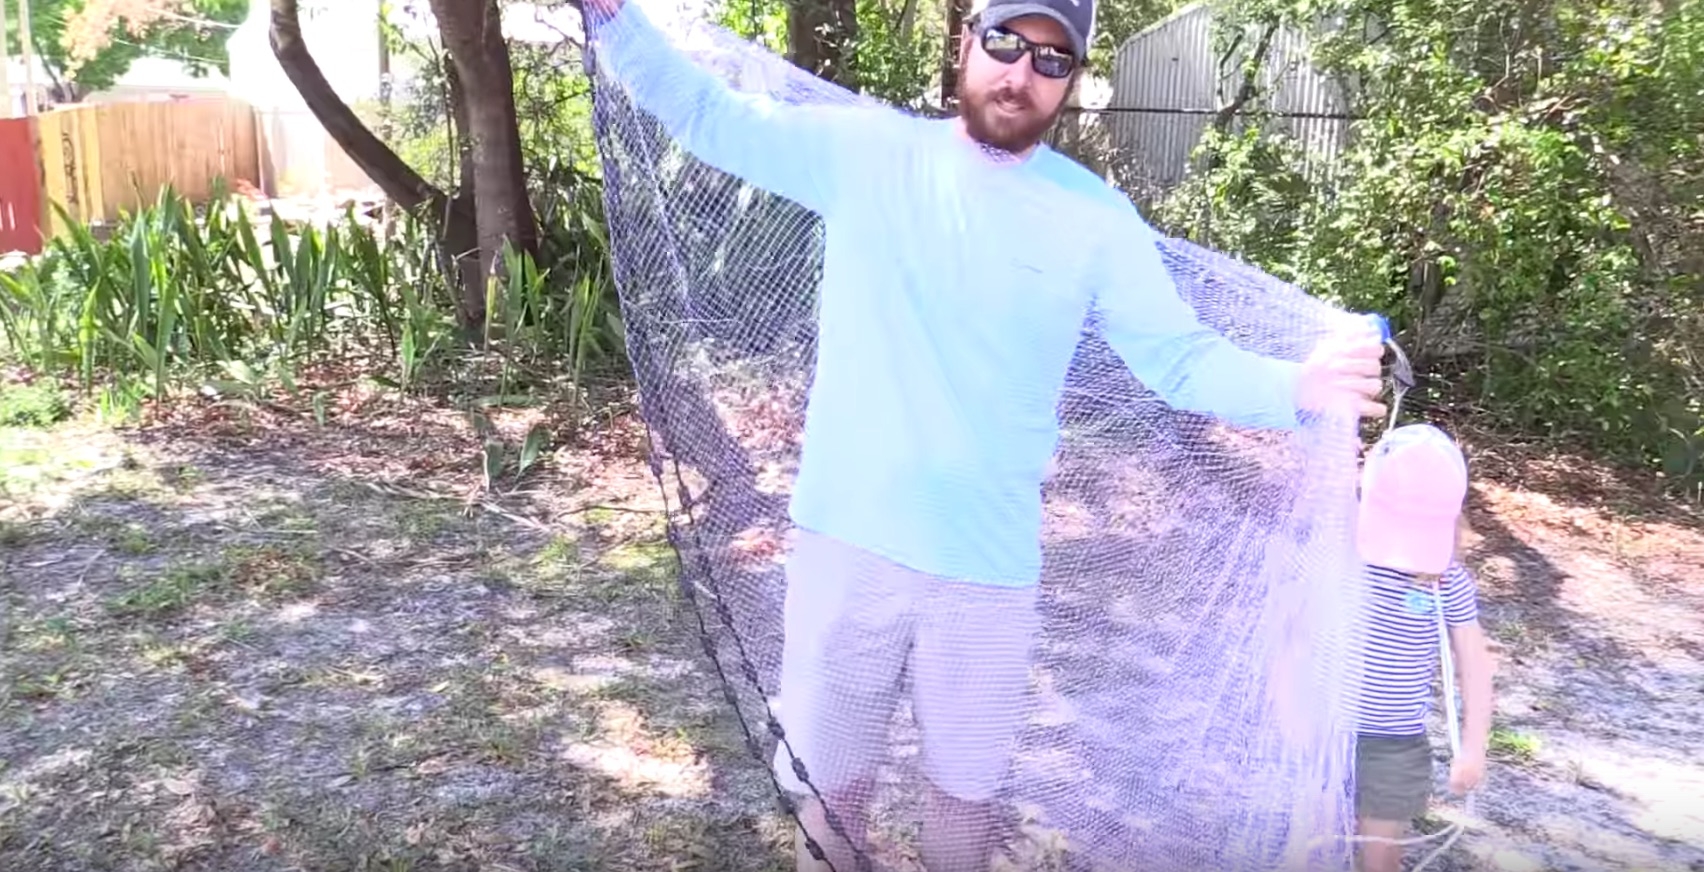 how to throw a 4 ft cast net